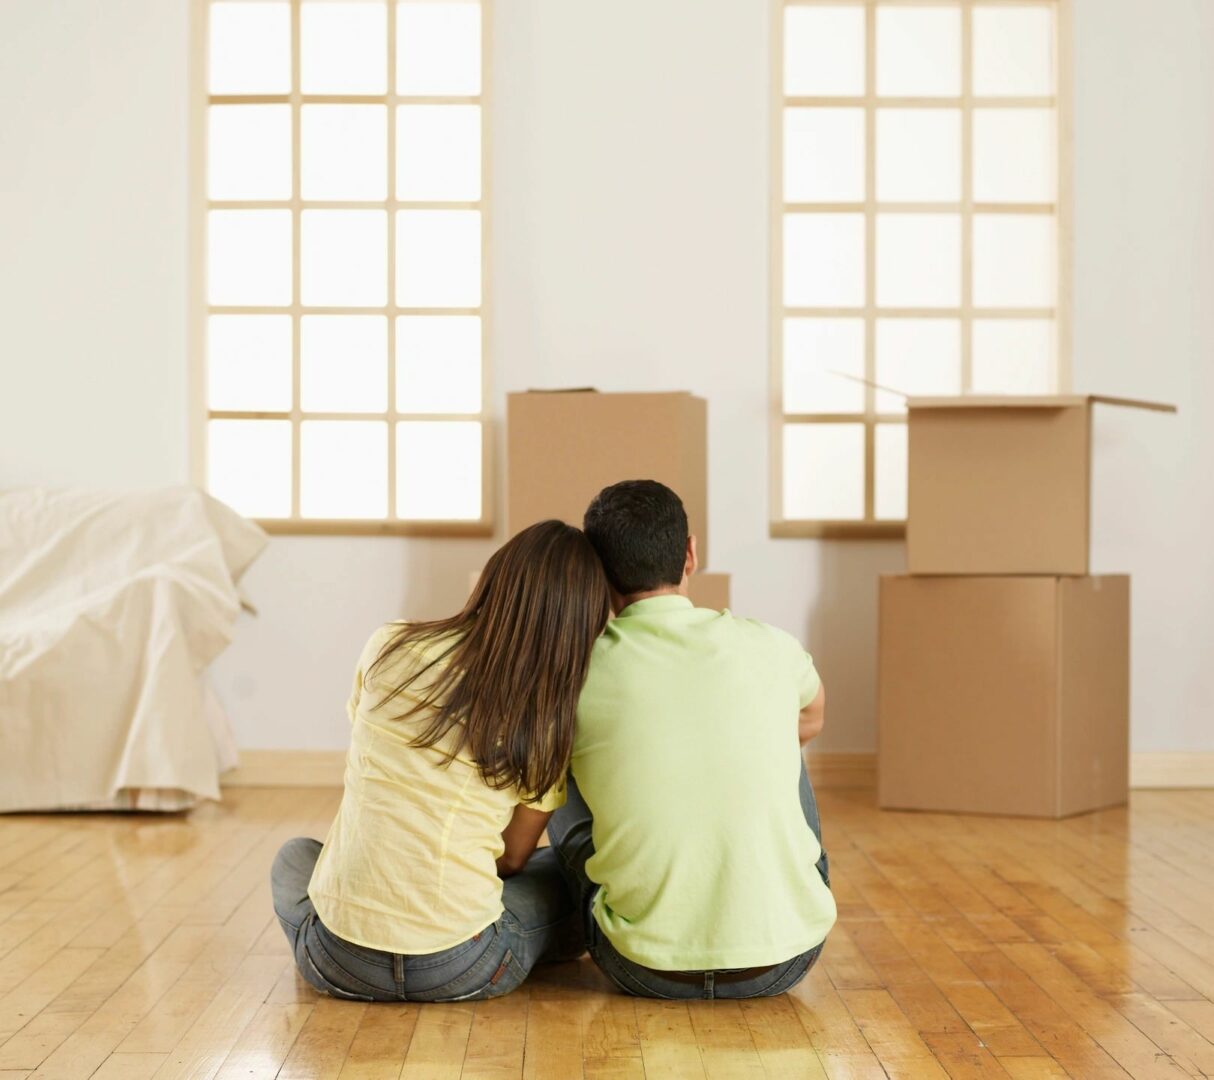 A couple sitting on the floor in front of boxes.